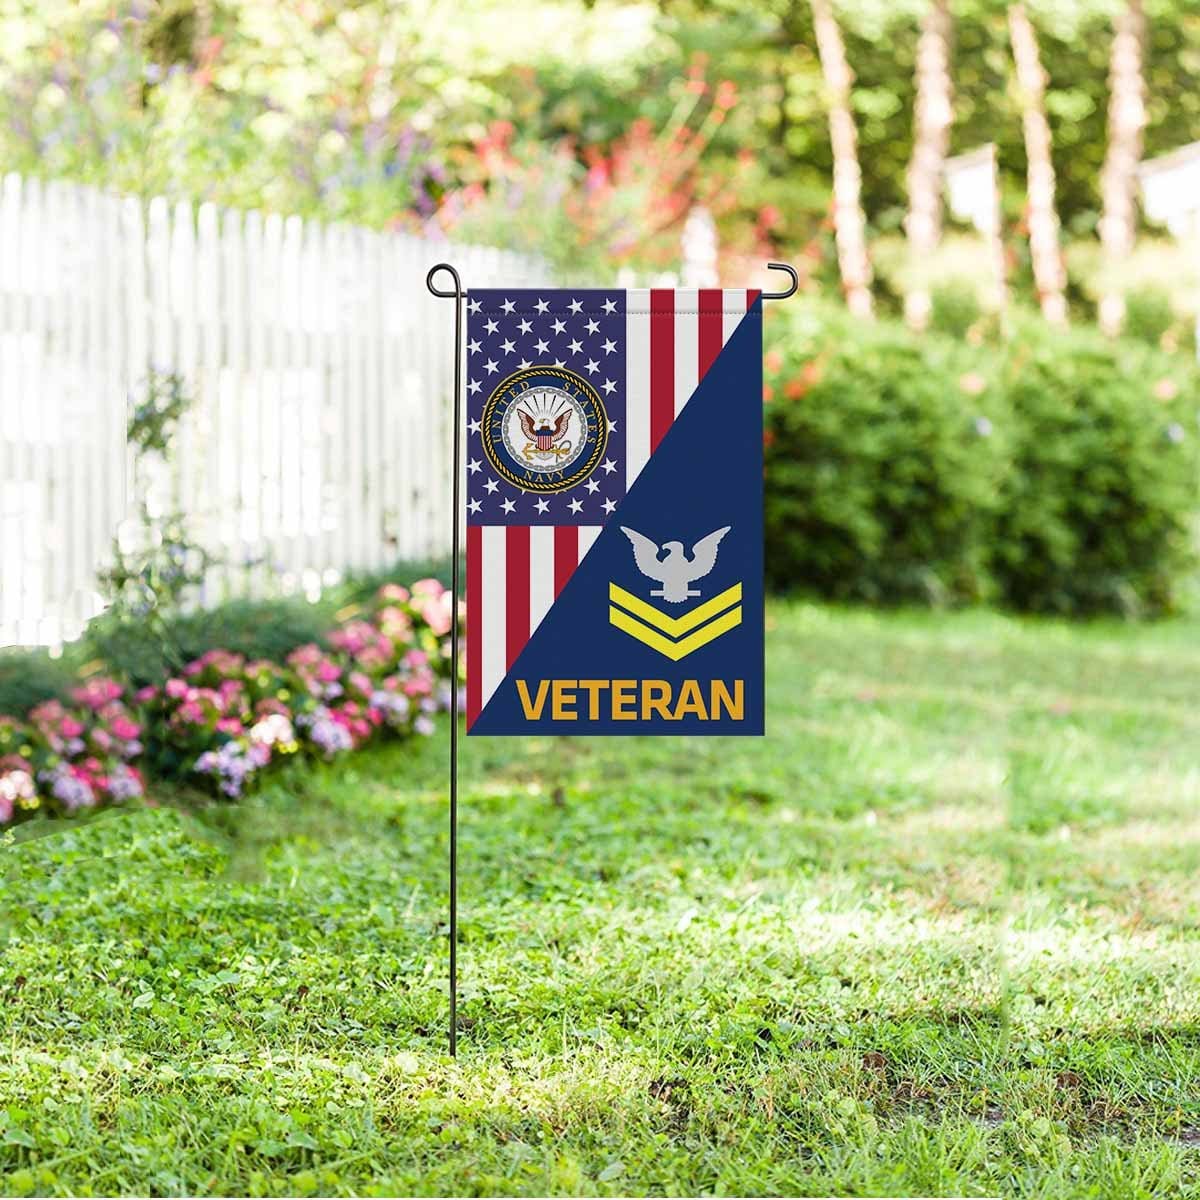 US Navy E-5 Petty Officer Second Class E5 PO2 Gold Stripe Collar Device Veteran Garden Flag/Yard Flag 12 inches x 18 inches Twin-Side Printing-GDFlag-Navy-Collar-Veterans Nation